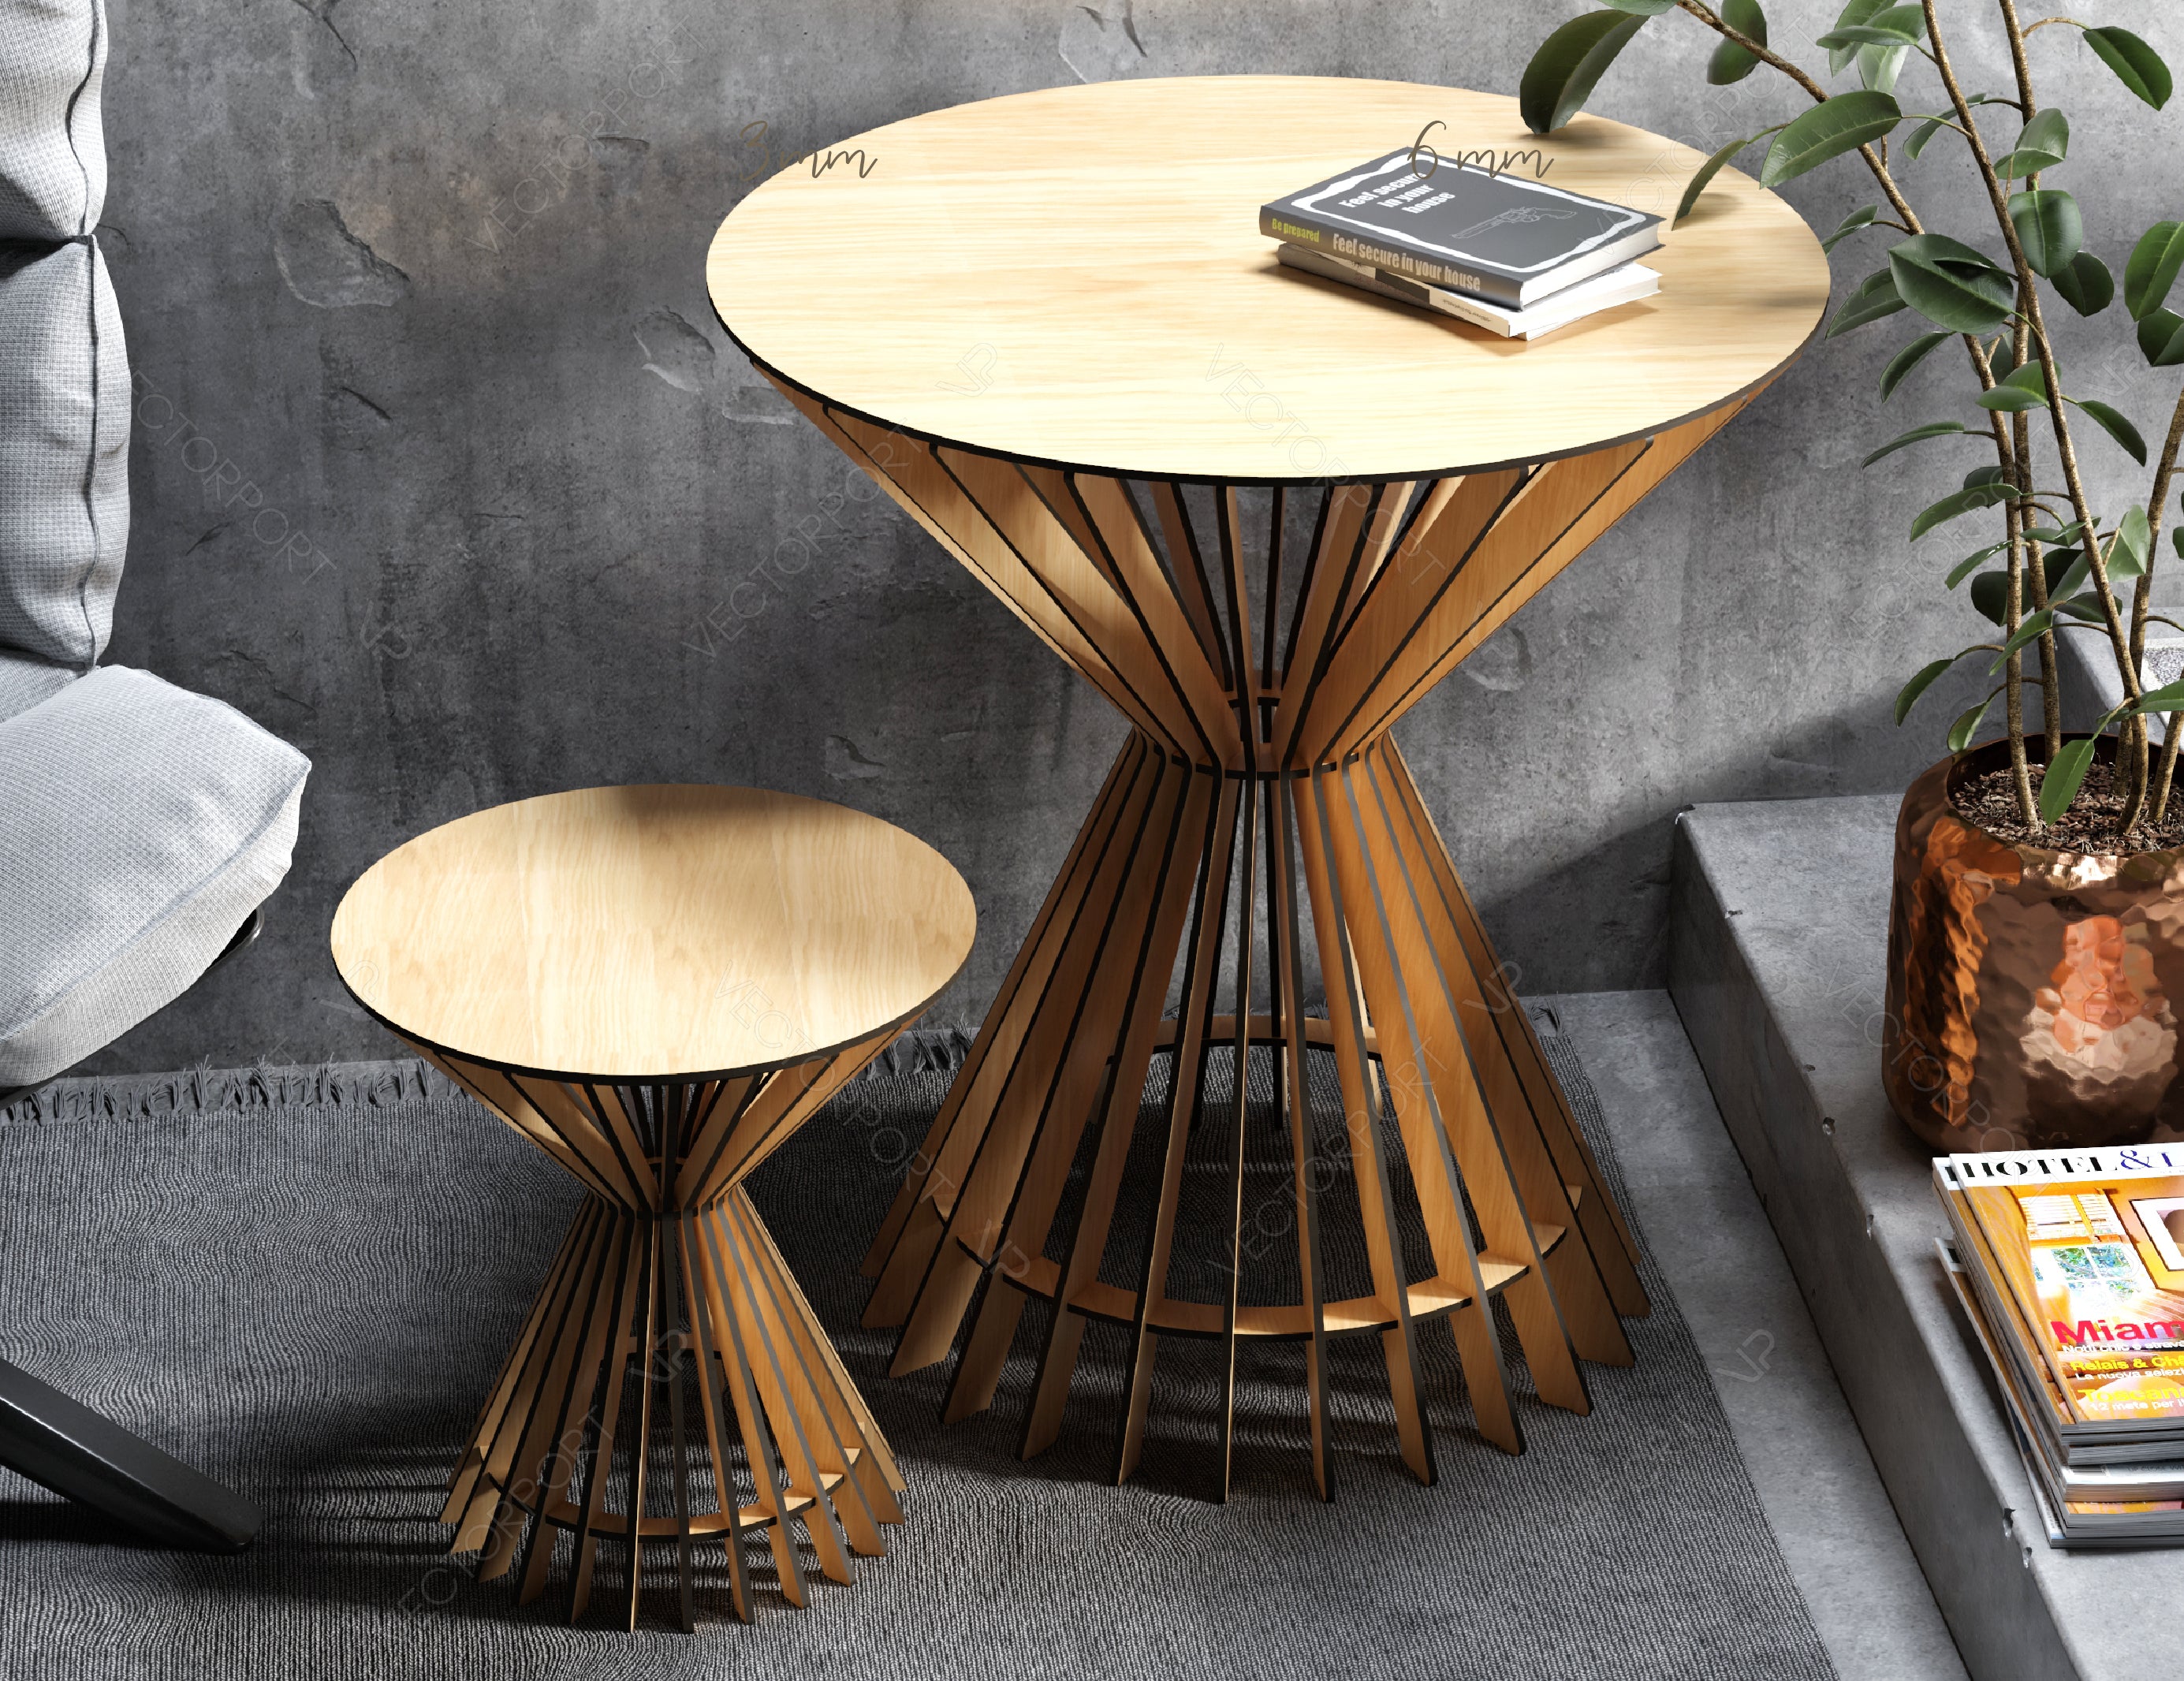 Elegant Modern Wooden Coffee Table in two different sizes Laser Cut Digital Download |#U216|